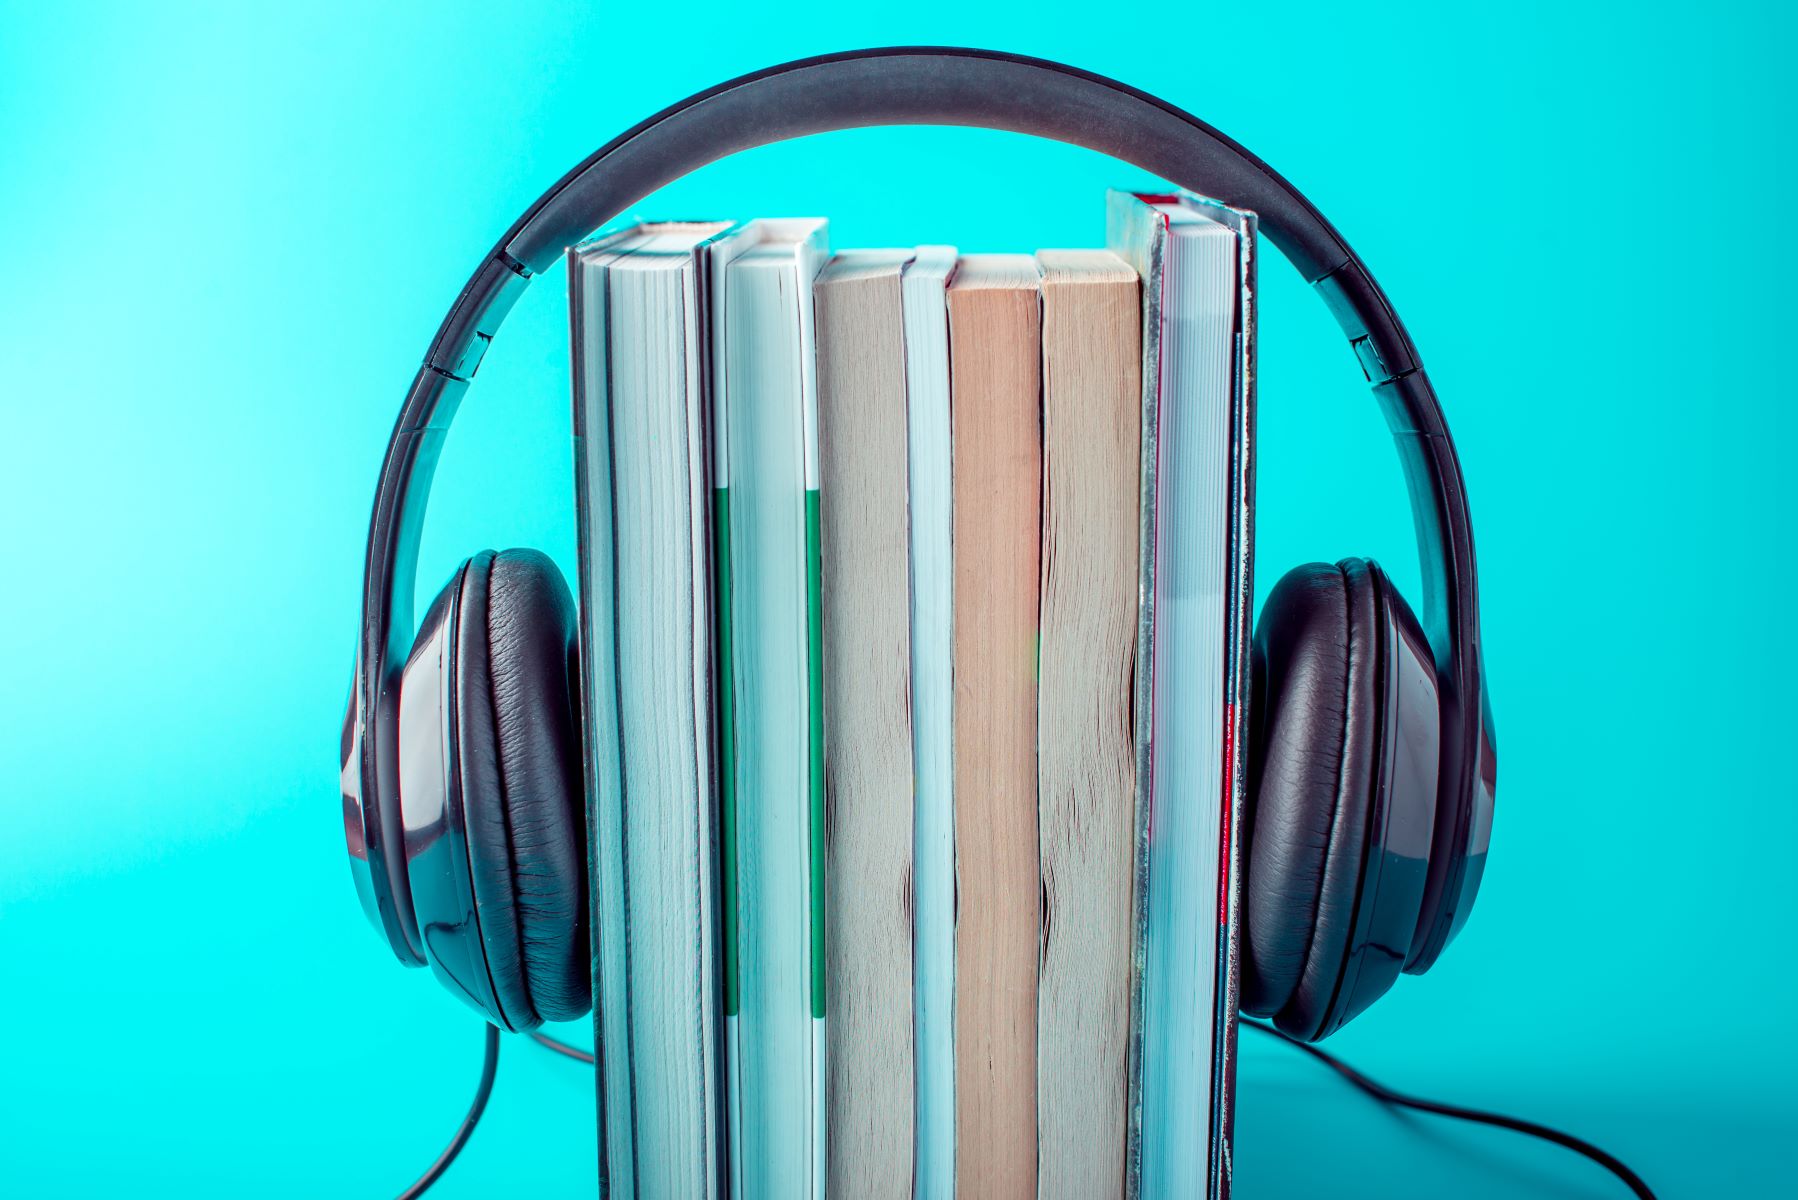 How Does Audiobook Work